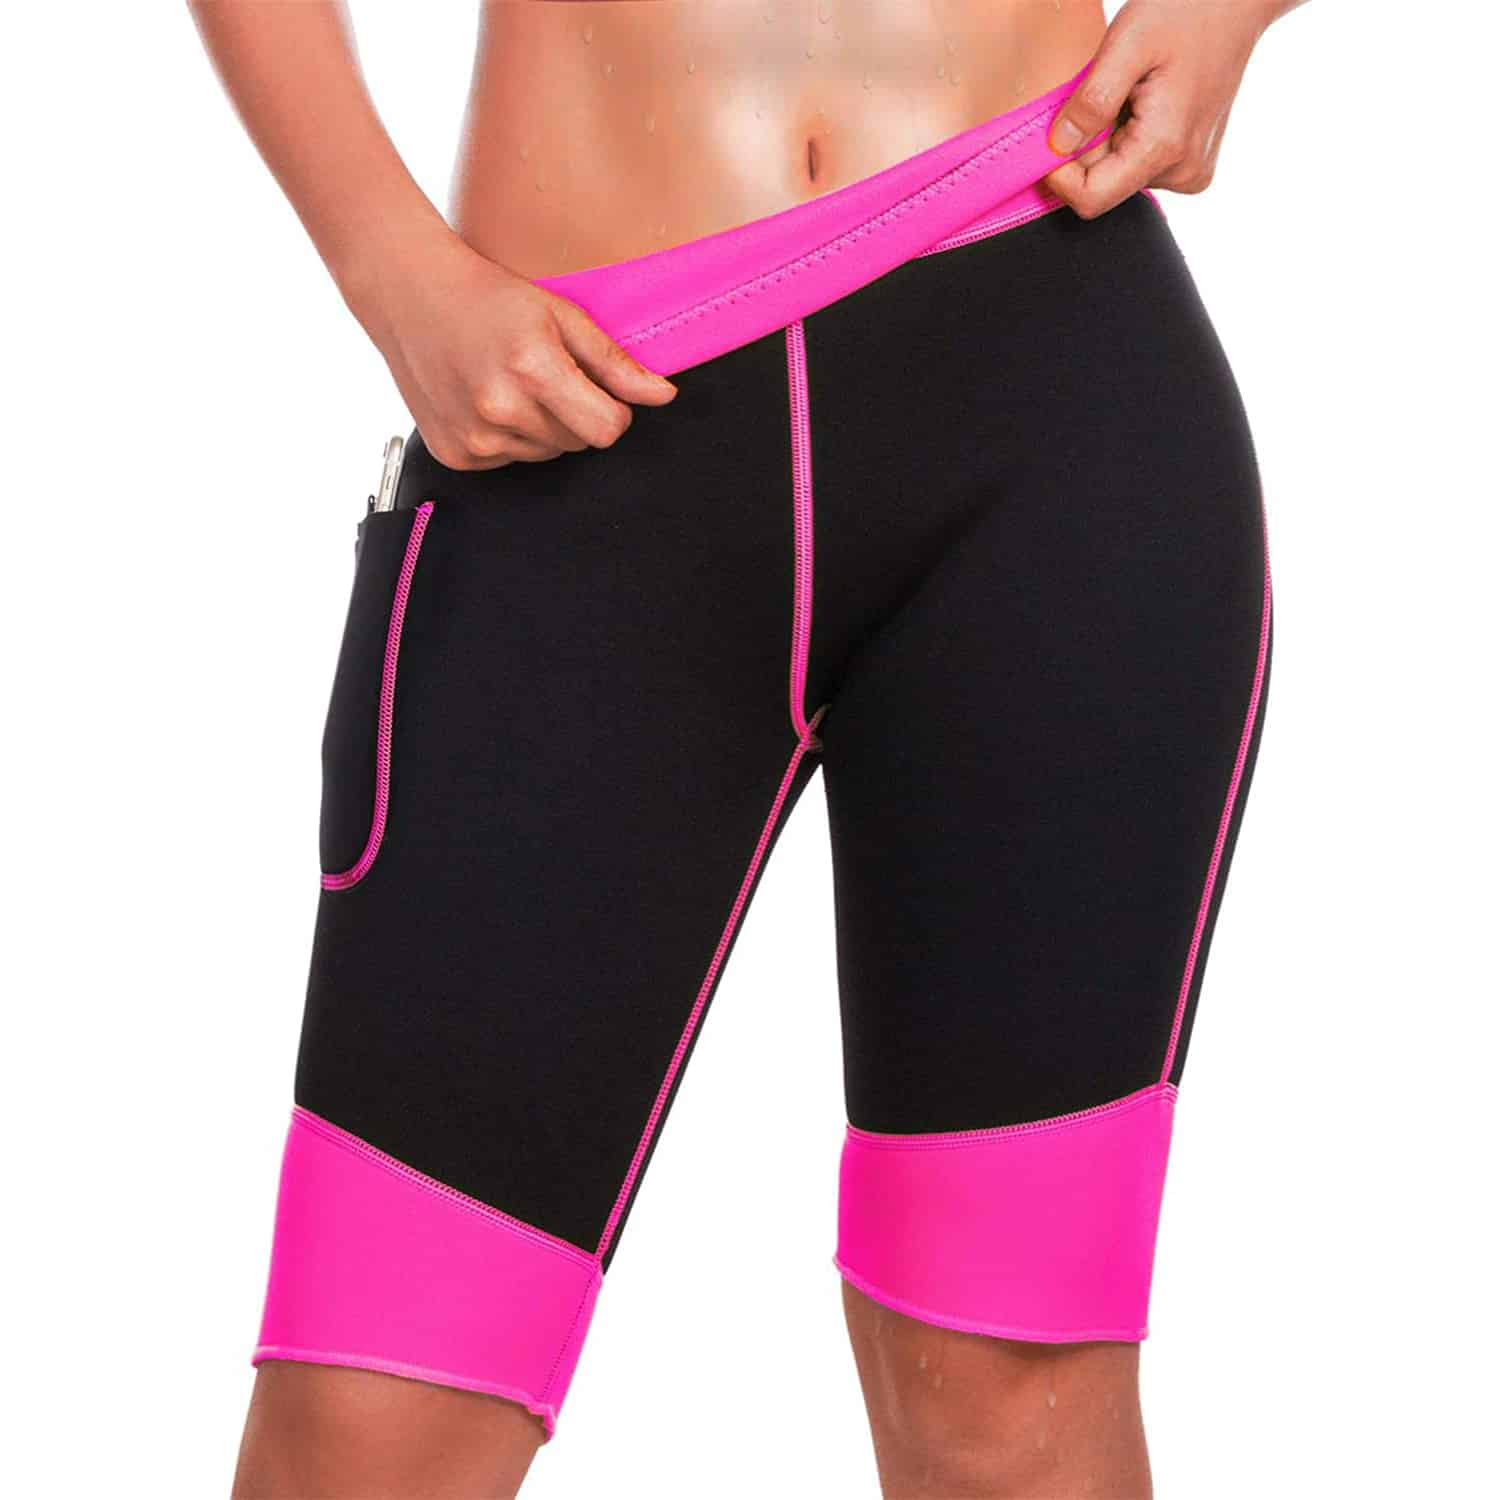 SCARBORO Sauna Sweat Pants for Women High Waist Compression Slimming  Weights Thermo Legging Workout Body Shaper Sauna Suit